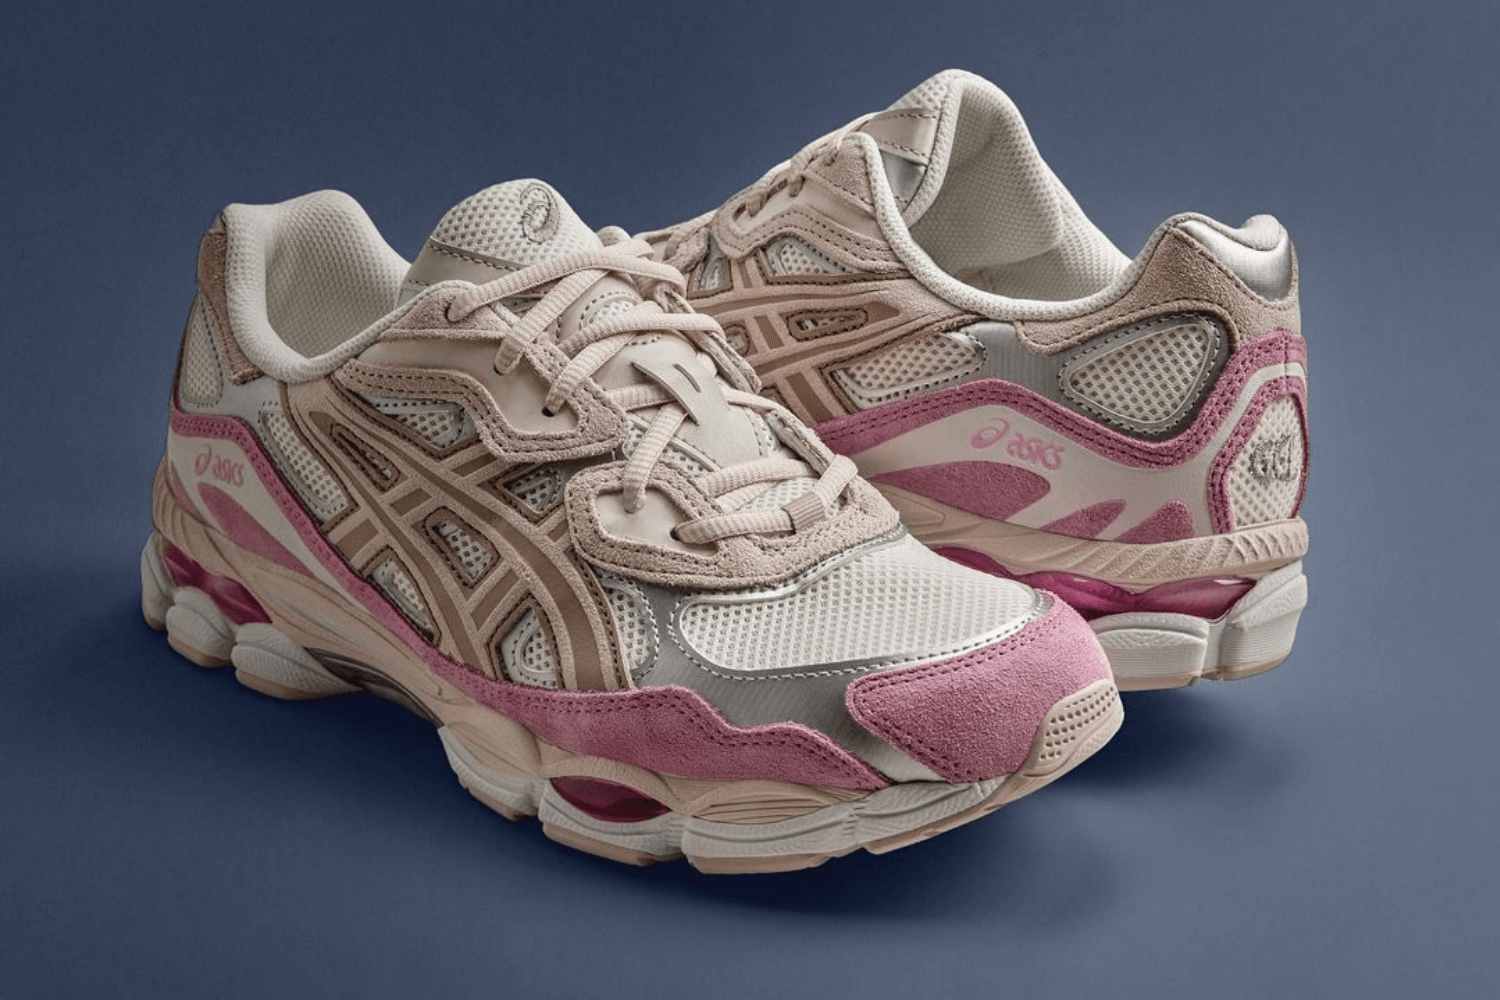 These popular models are available in the new ASICS collection